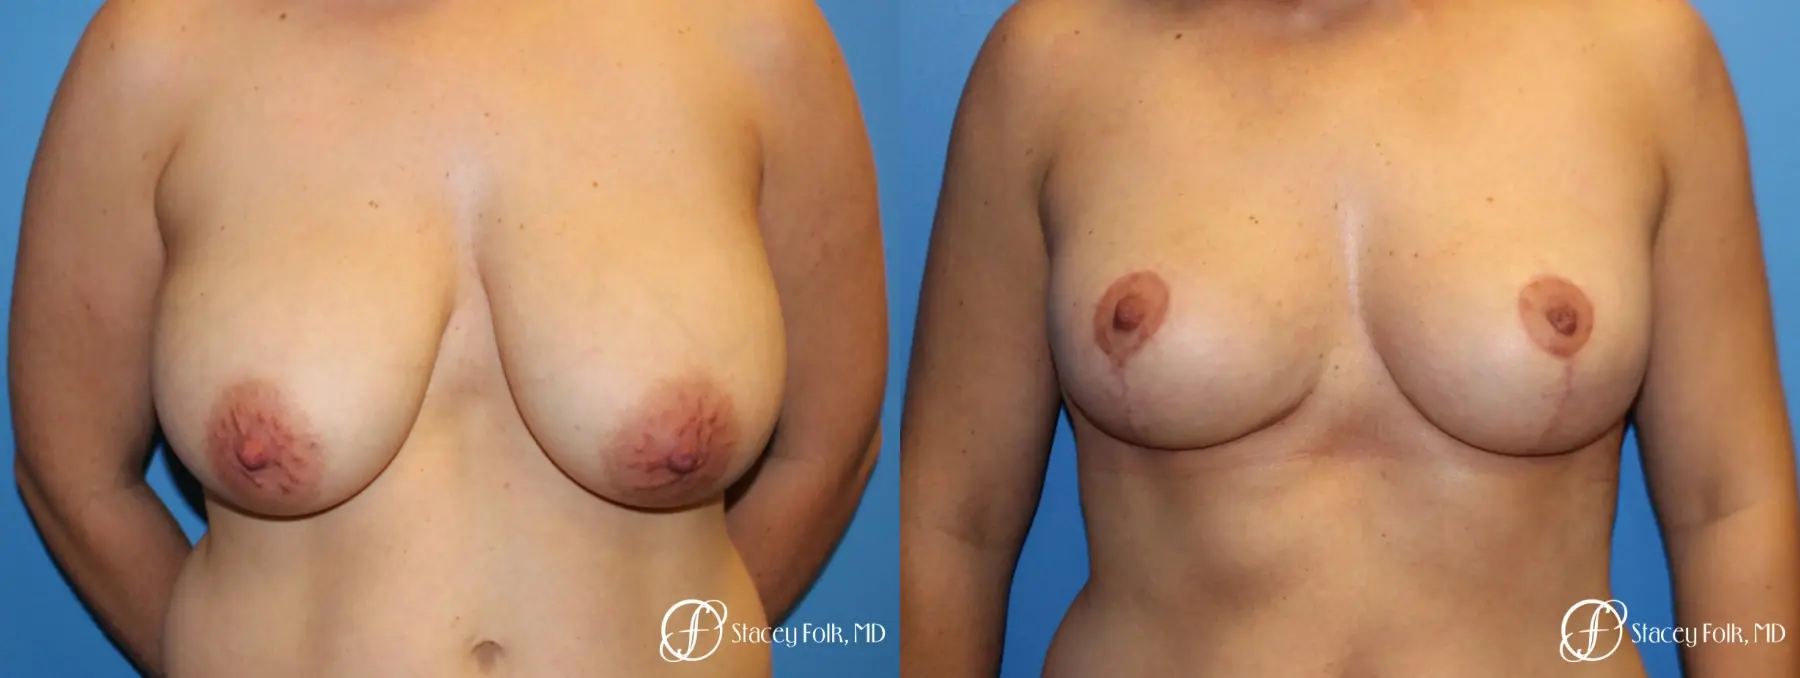 Denver Breast Lift - Mastopexy 7988 - Before and After